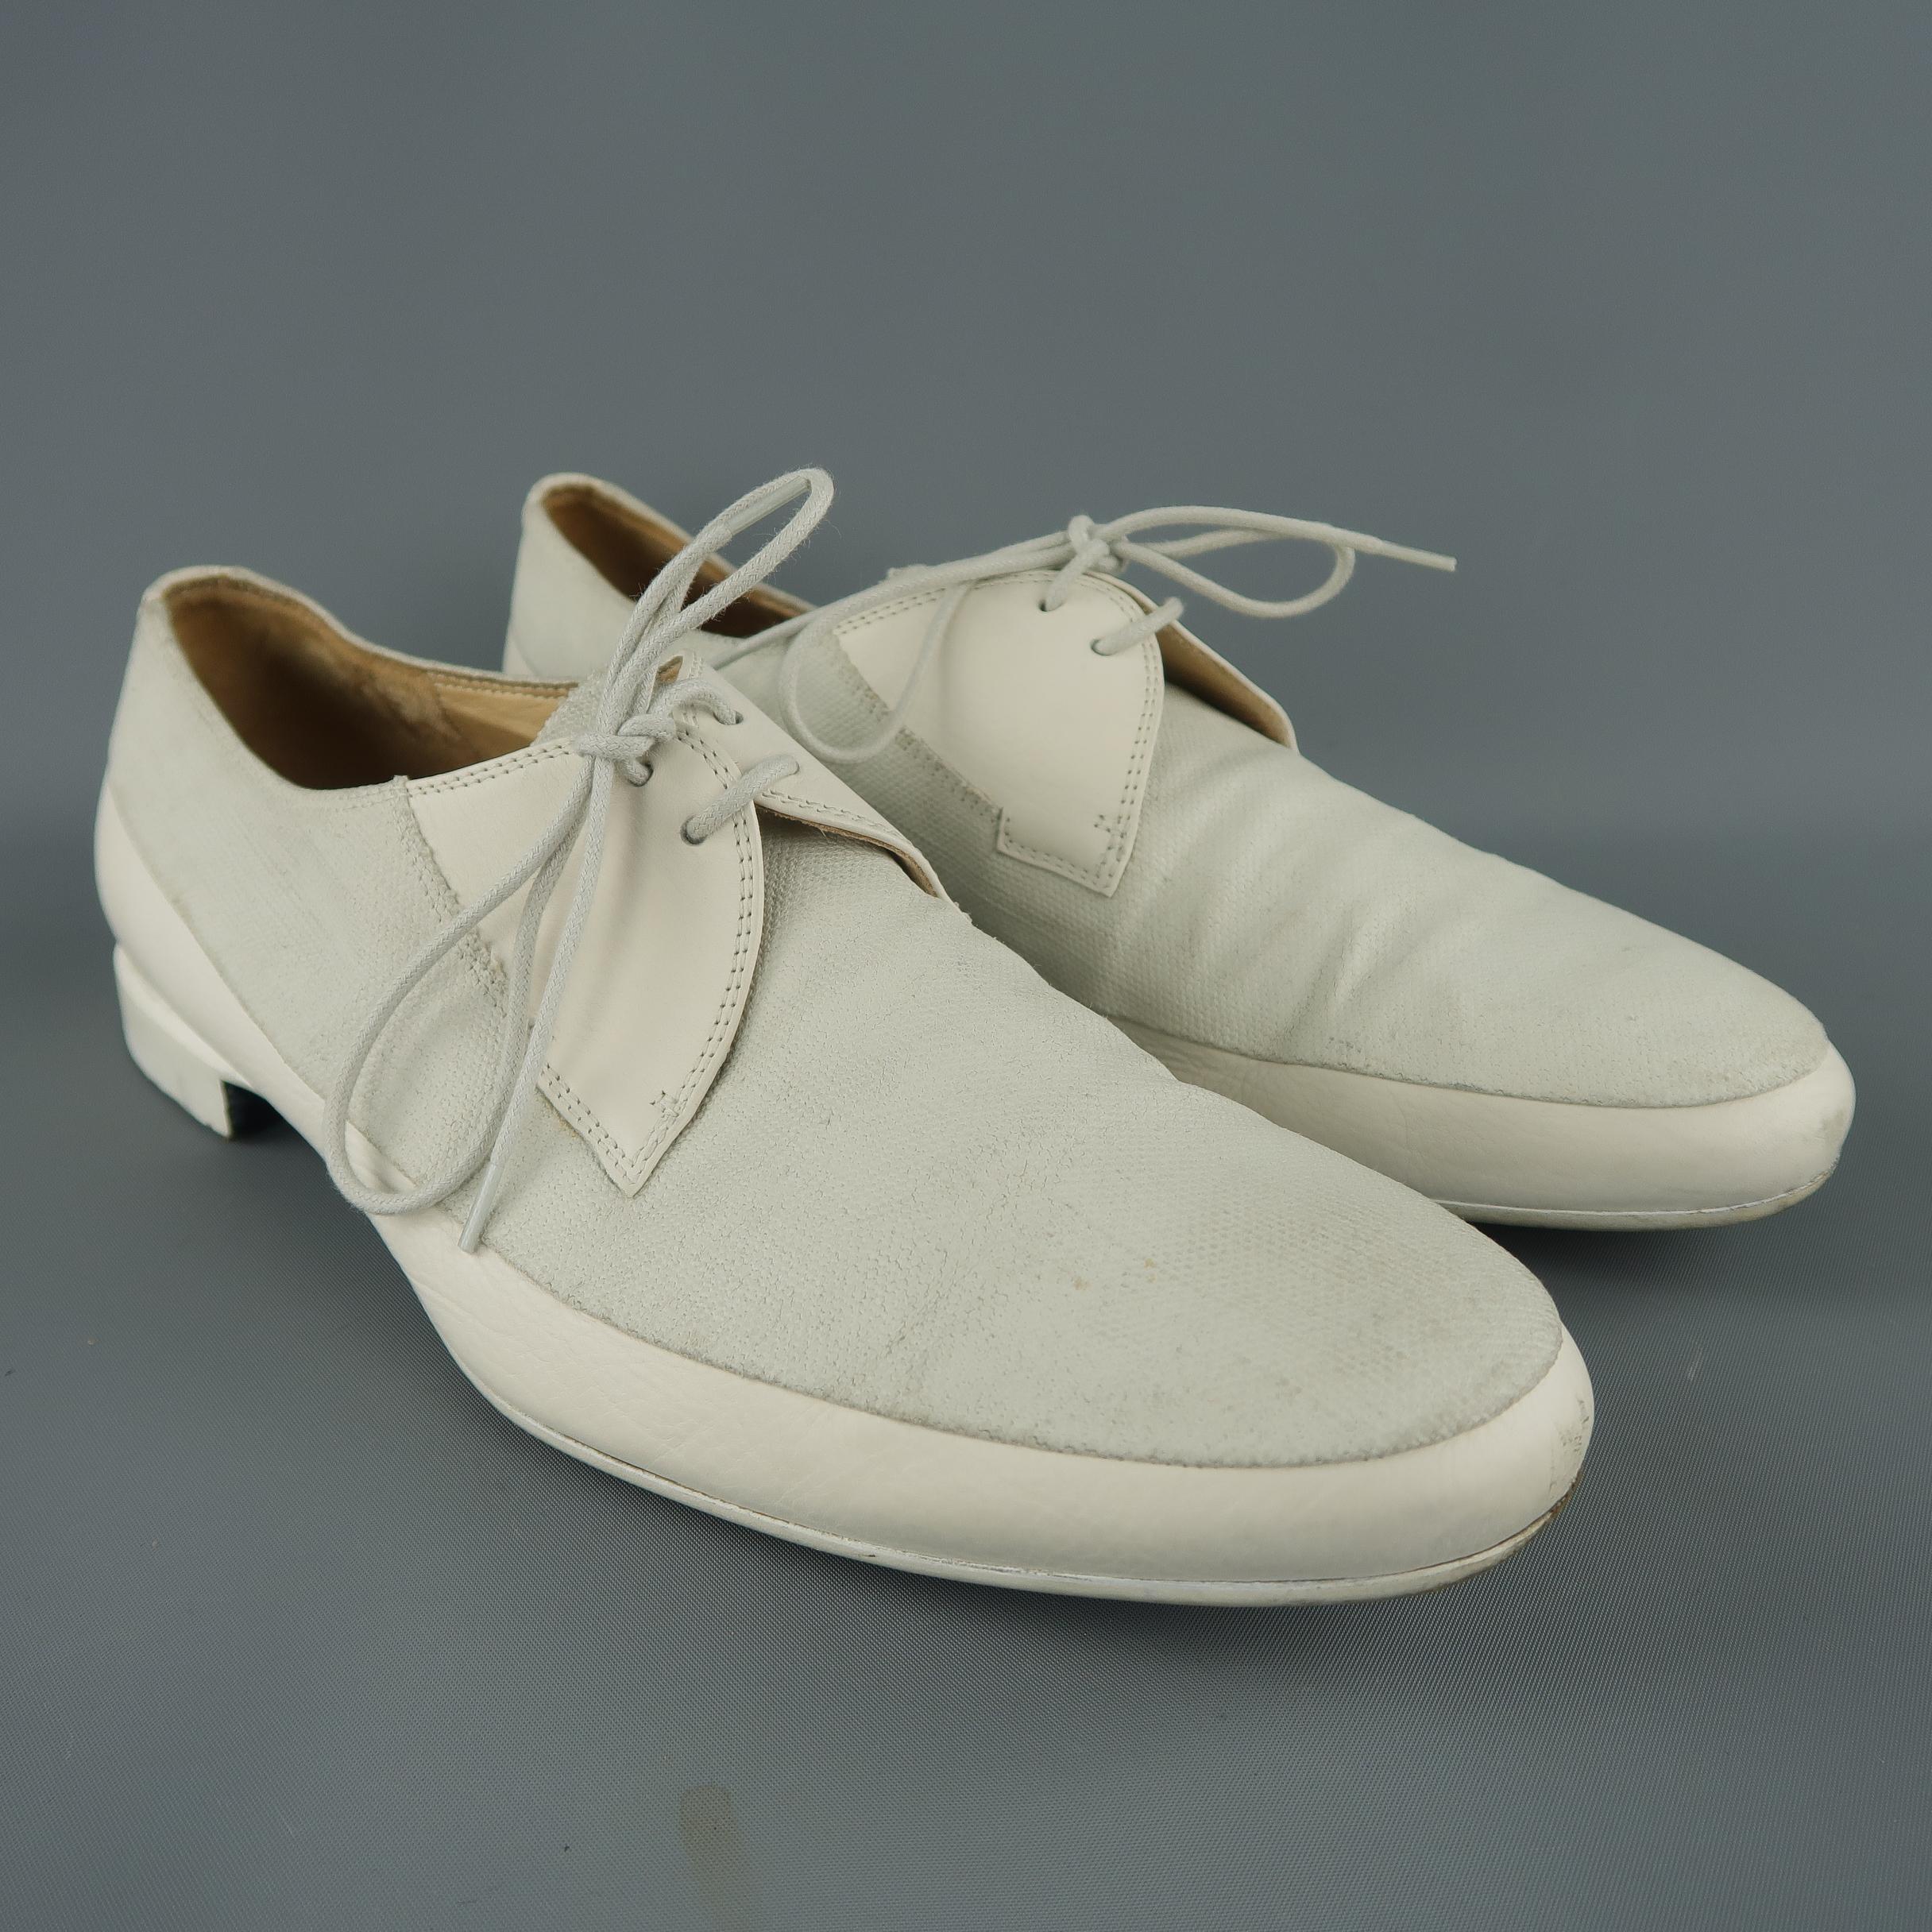 DRIES VAN NOTEN semi formal dress shoes come in white leather with a canvas apron toe upper, leather lace up panel, and monochromatic white heeled sole. Wear consistent with age. As-is. Made in Italy.
 
Good Pre-Owned Condition.
Marked: IT 43